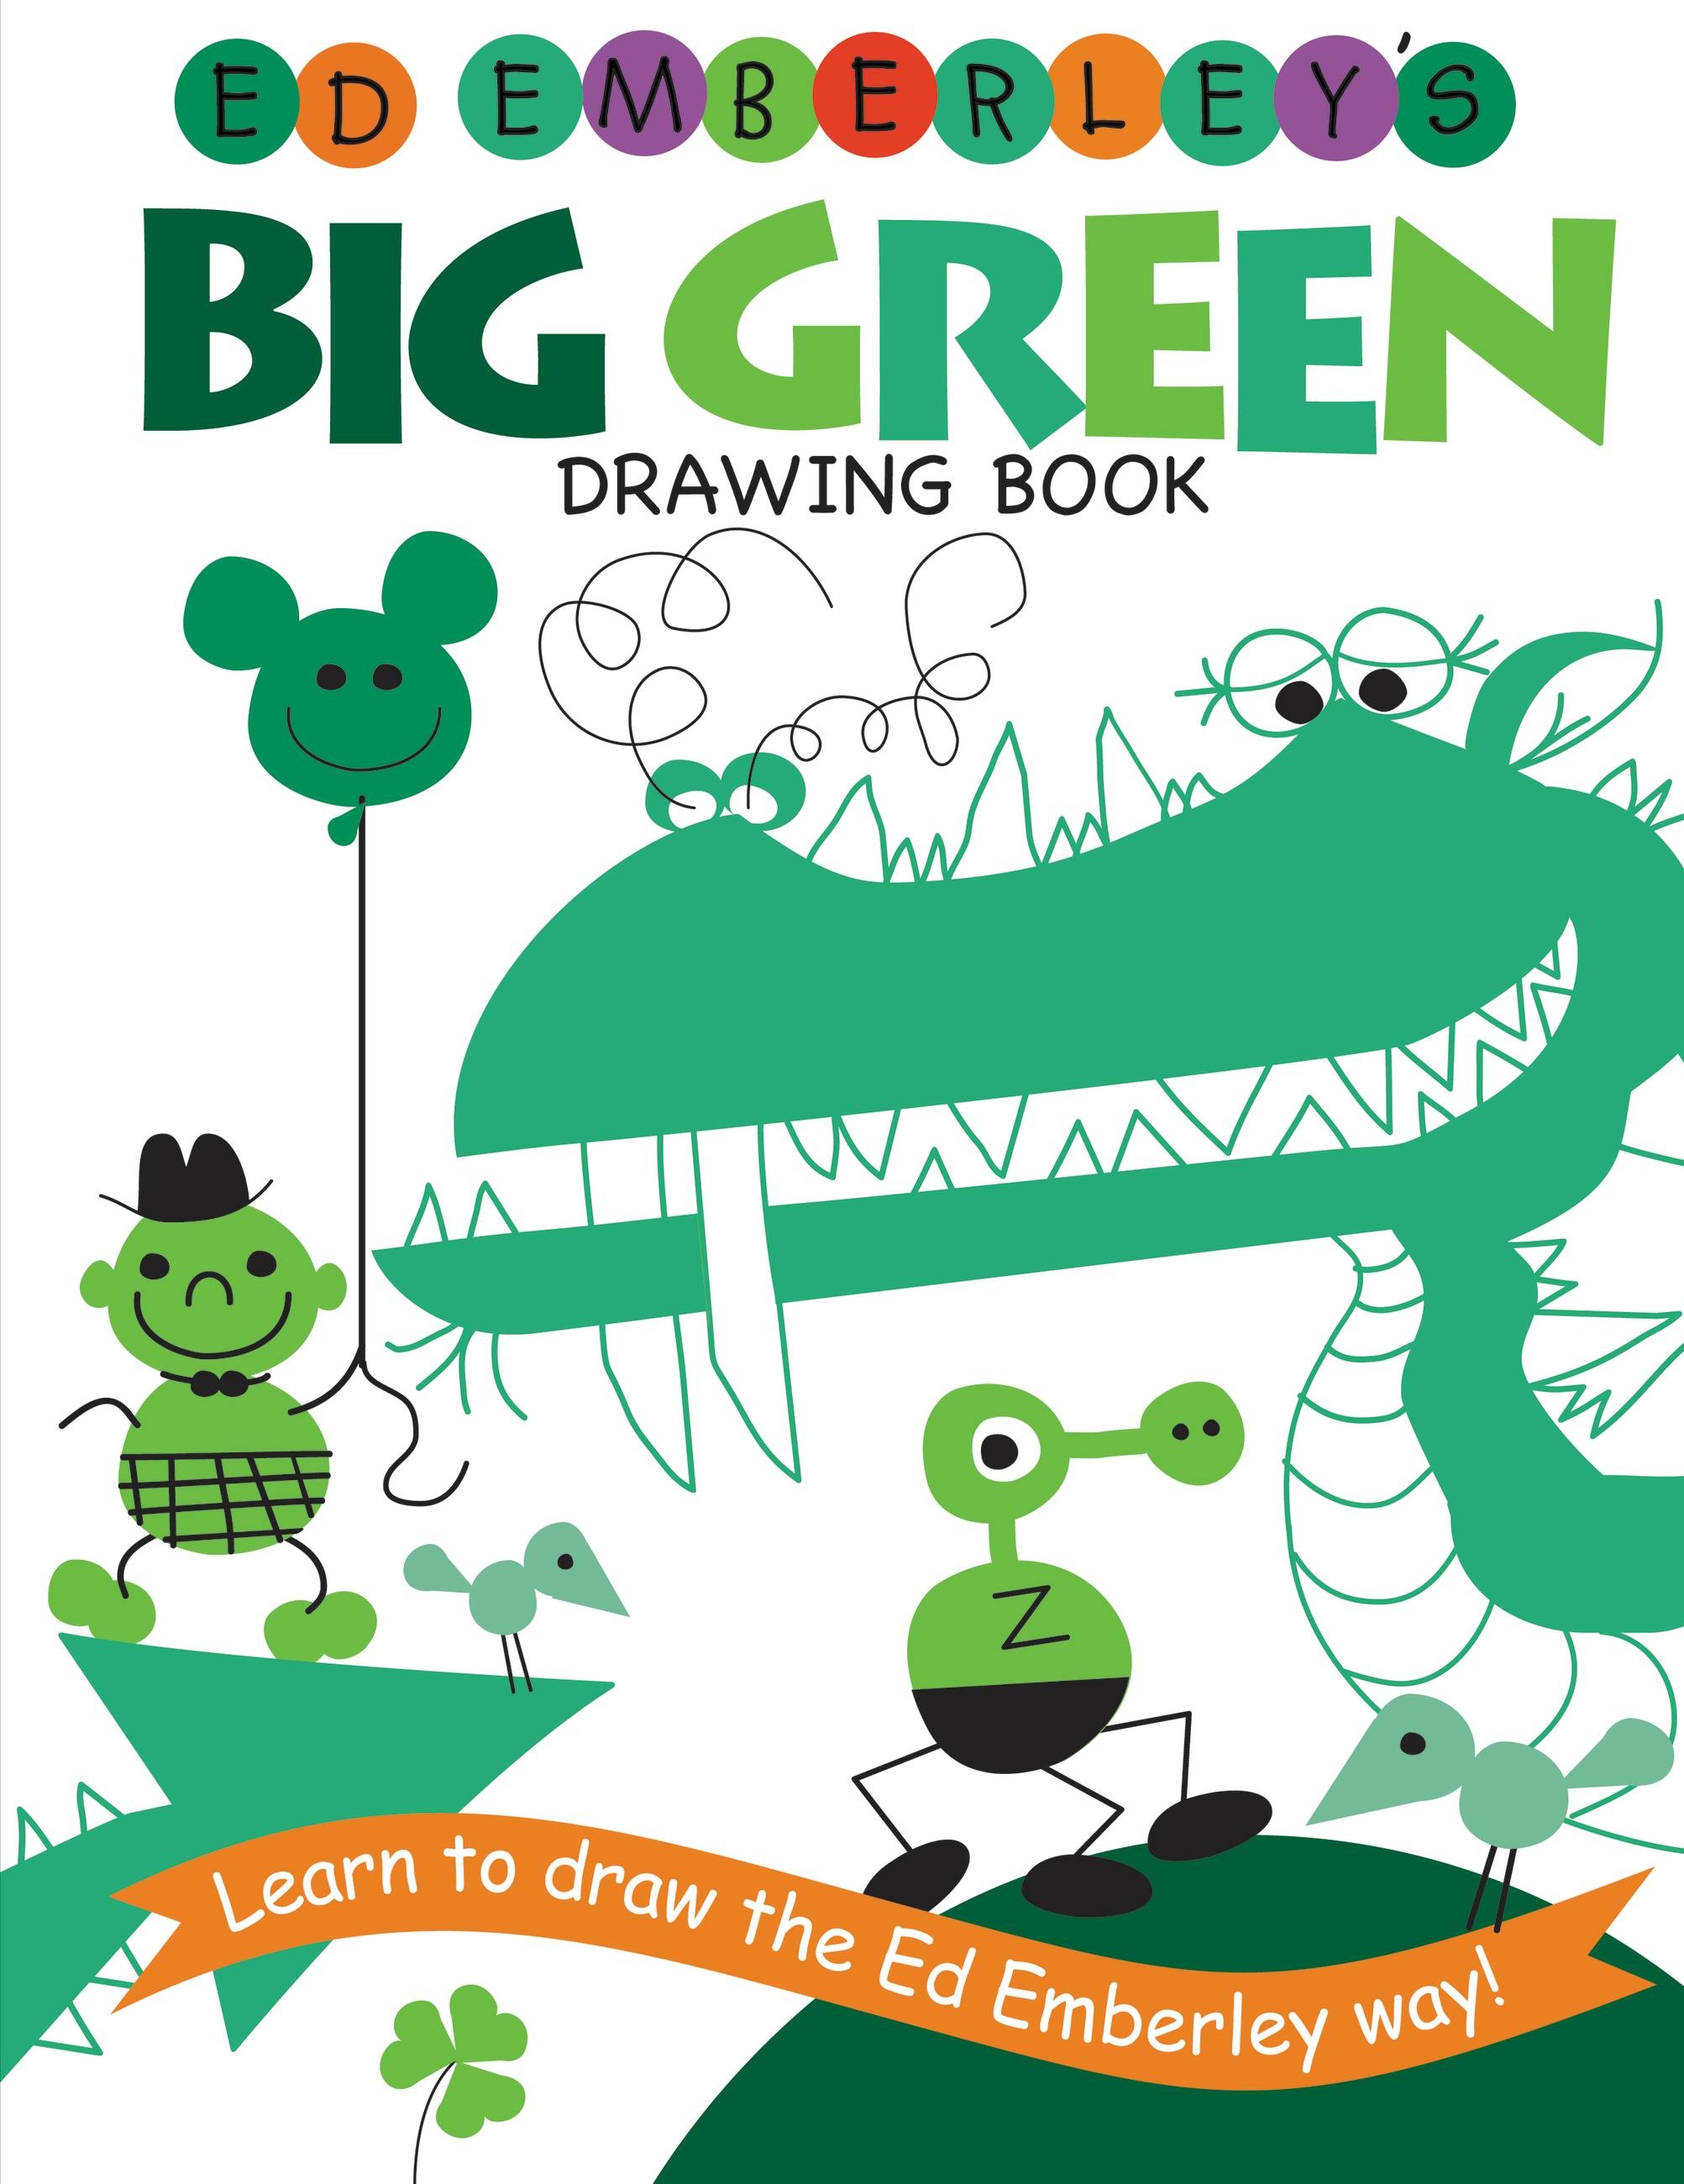 Ed Emberley's Big Green Drawing Book by Ed Emberley | Hachette Book Group